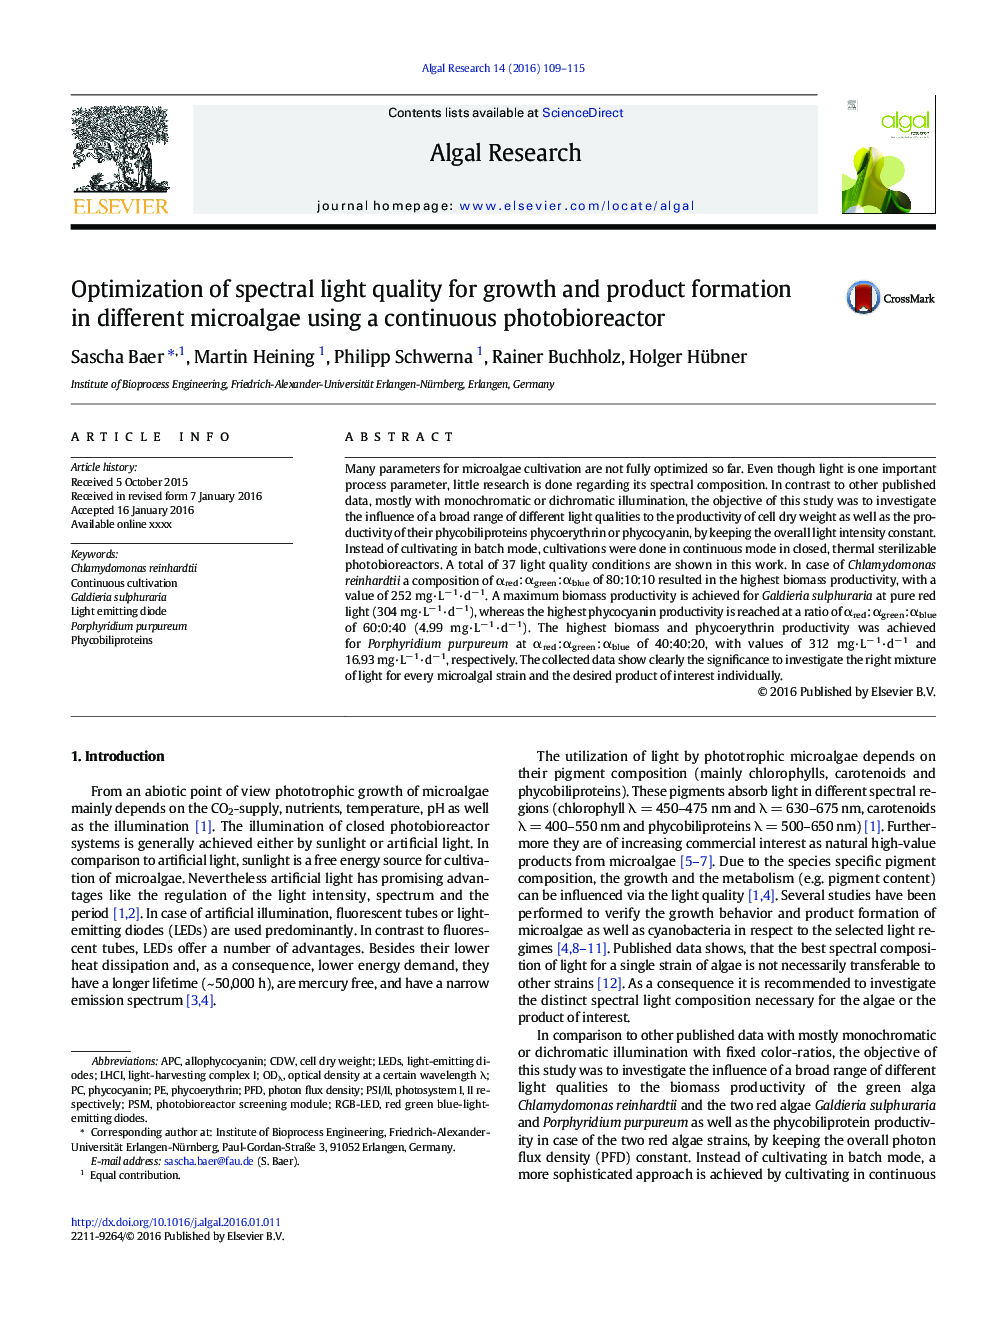 Optimization of spectral light quality for growth and product formation in different microalgae using a continuous photobioreactor